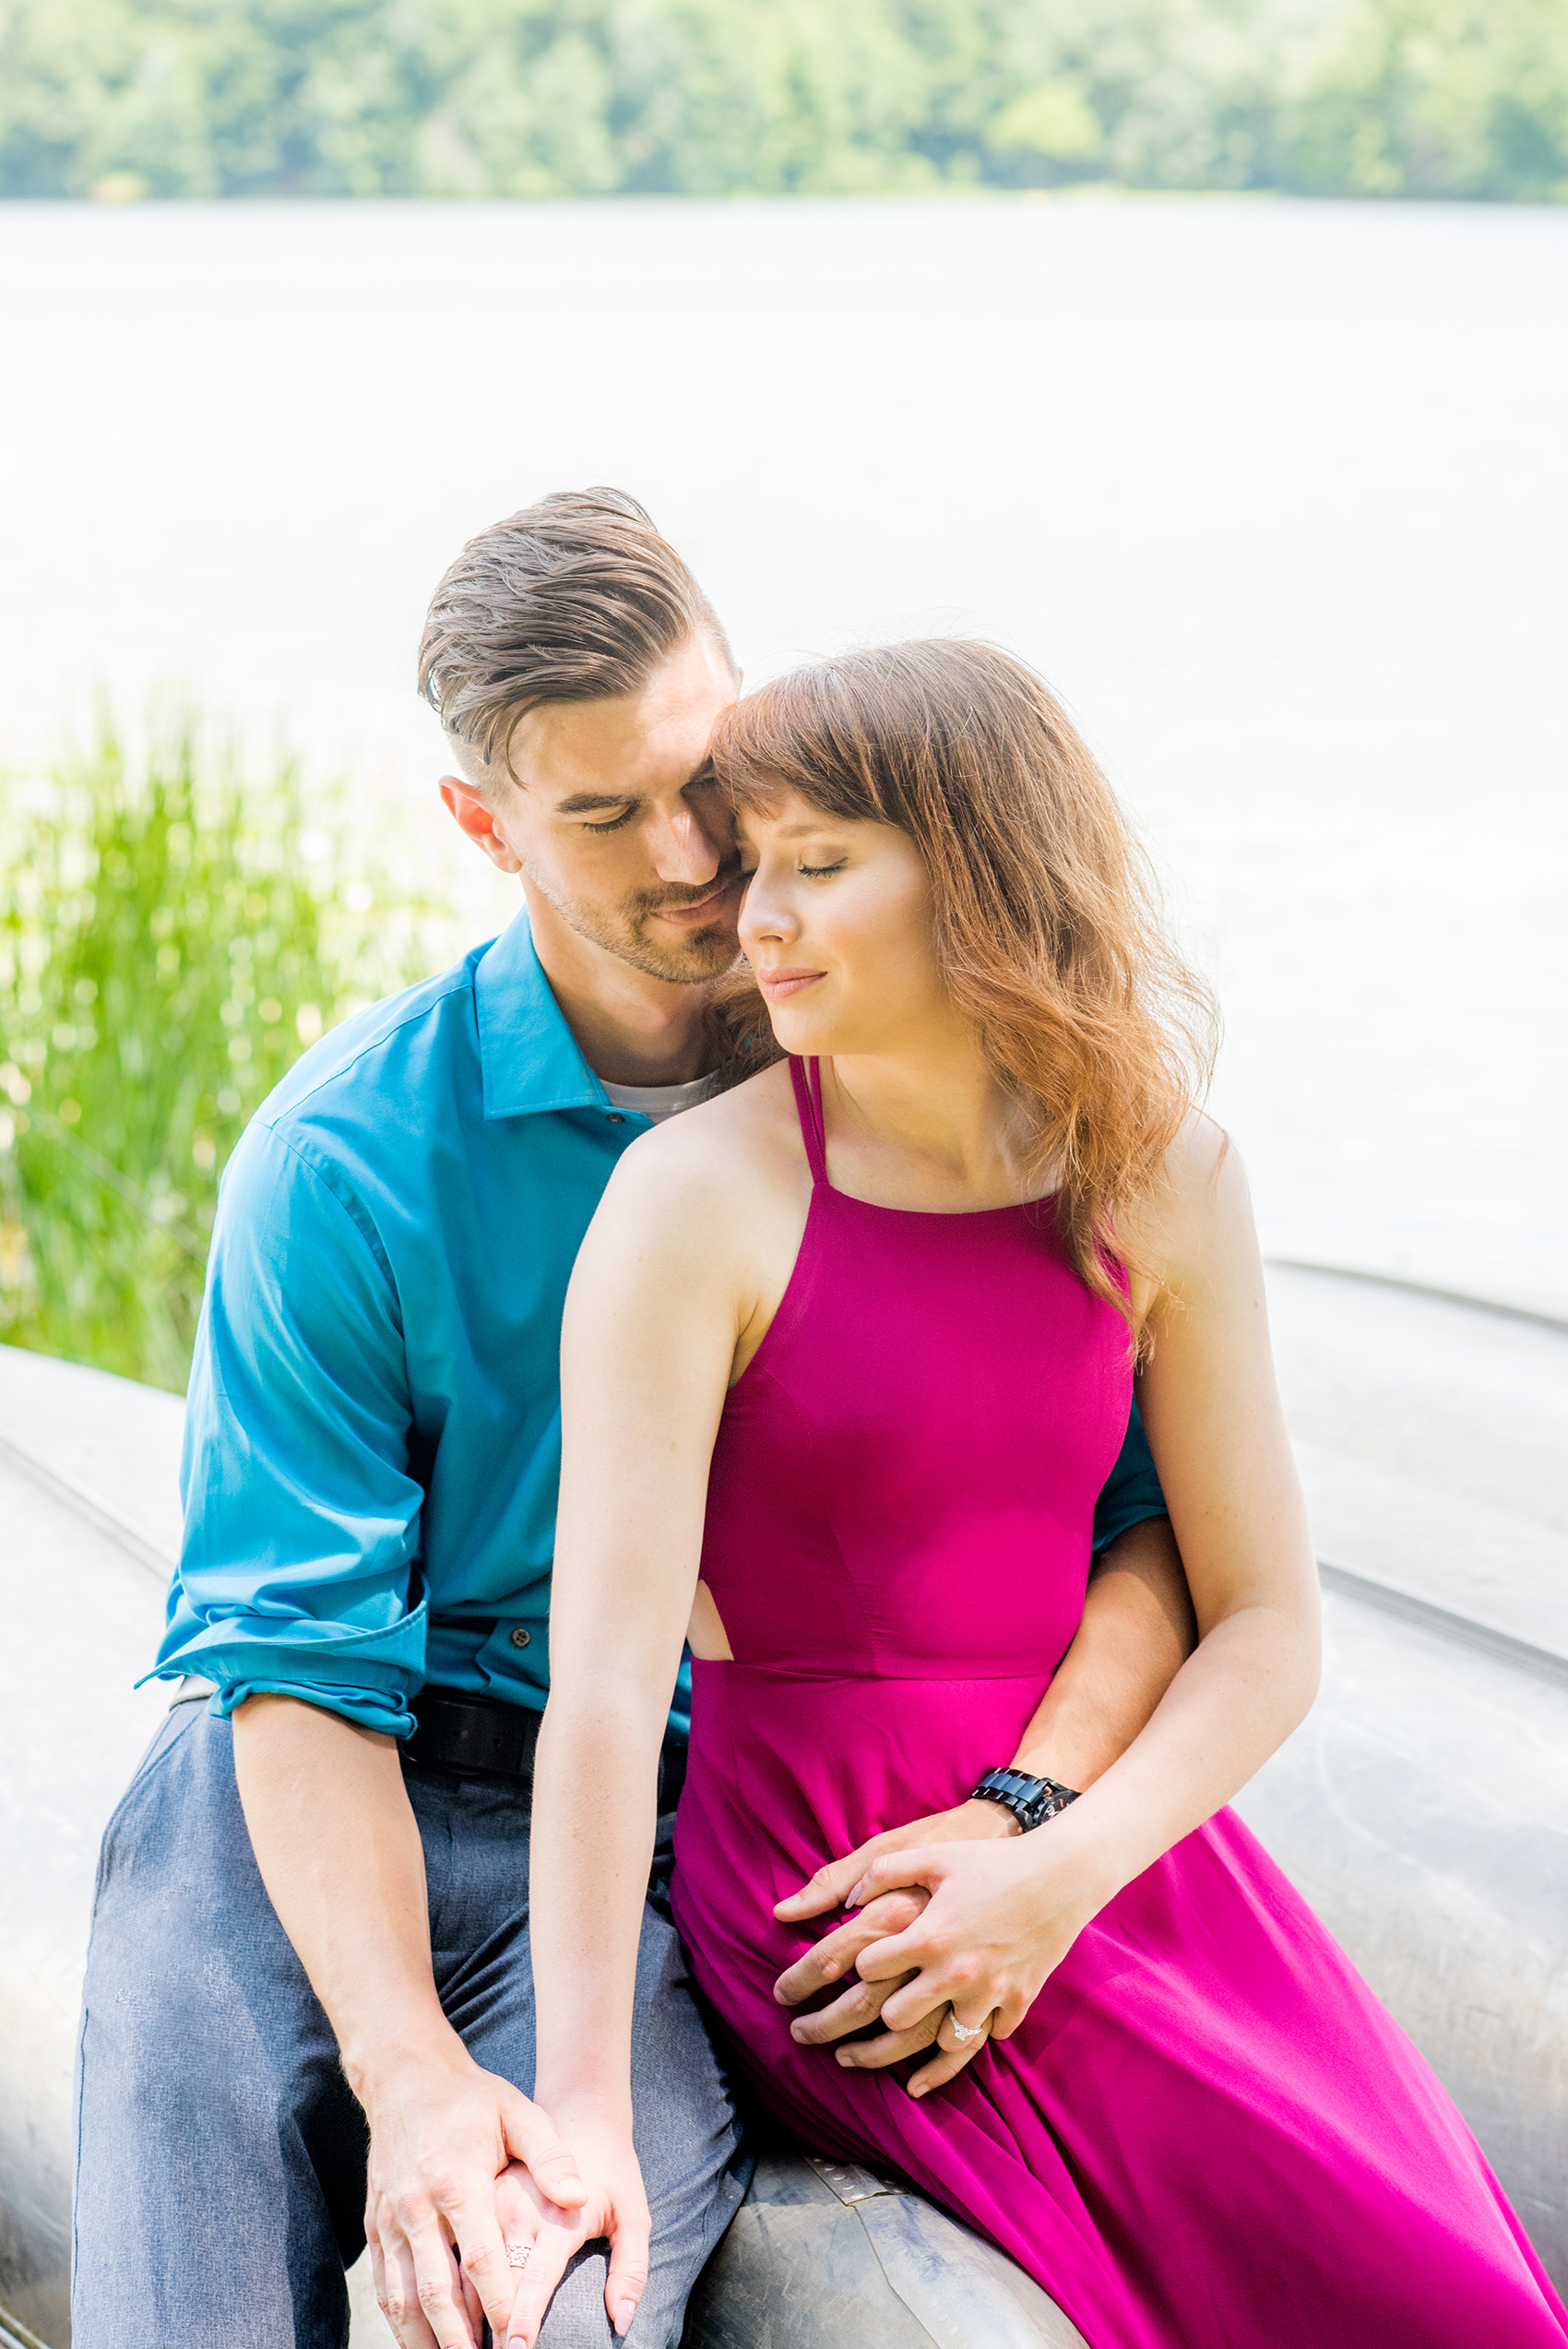 Maryland summer engagement photos by Mikkel Paige Photography. This couple wore semi-formal outfits with the bride in a beautiful, sexy back fuchsia pink gown and the groom in a blue button down and grey pants. Their elegant outdoor park pictures were perfect for the season! Click through to see more from their romantic pictures in the woods! #mikkelpaige #summerengagementphotos #marylandengagementphotos #marylandweddingphotographer #parkengagementsession #engagementphotooutfitideas #engagementphotos #savethedatephotos 